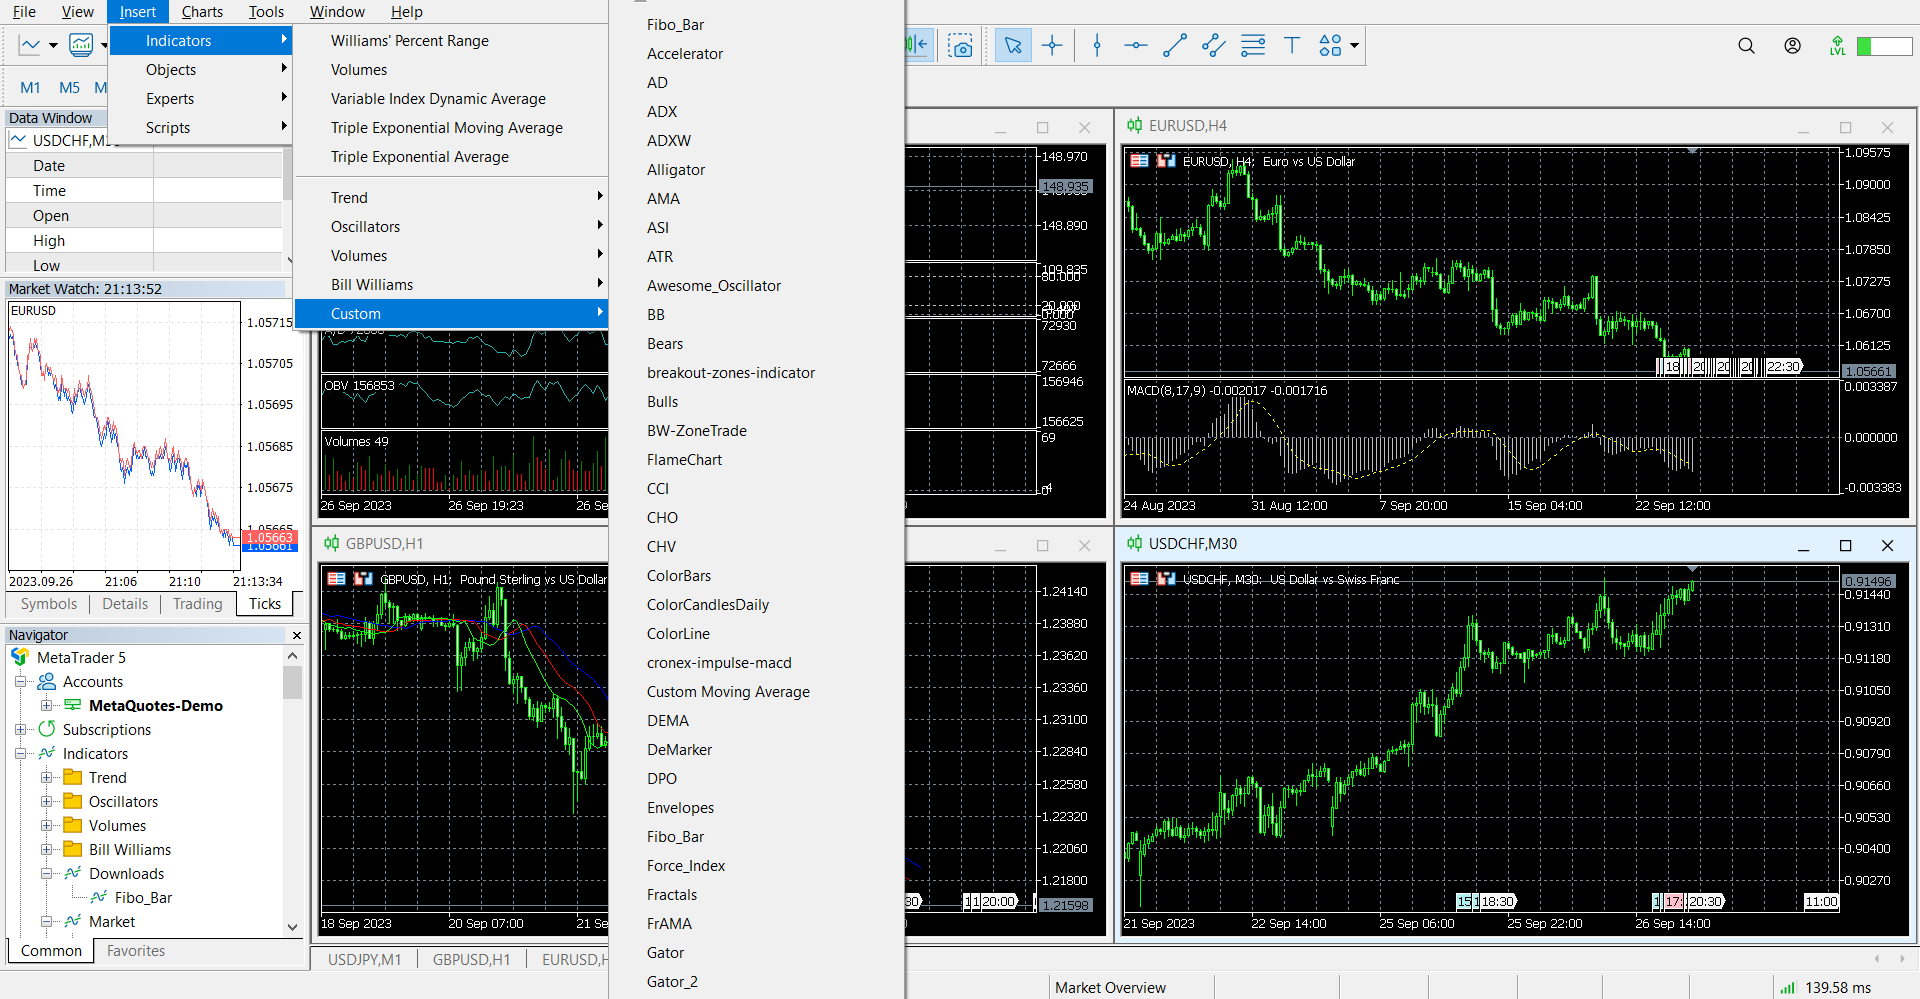 Technical analysis tools